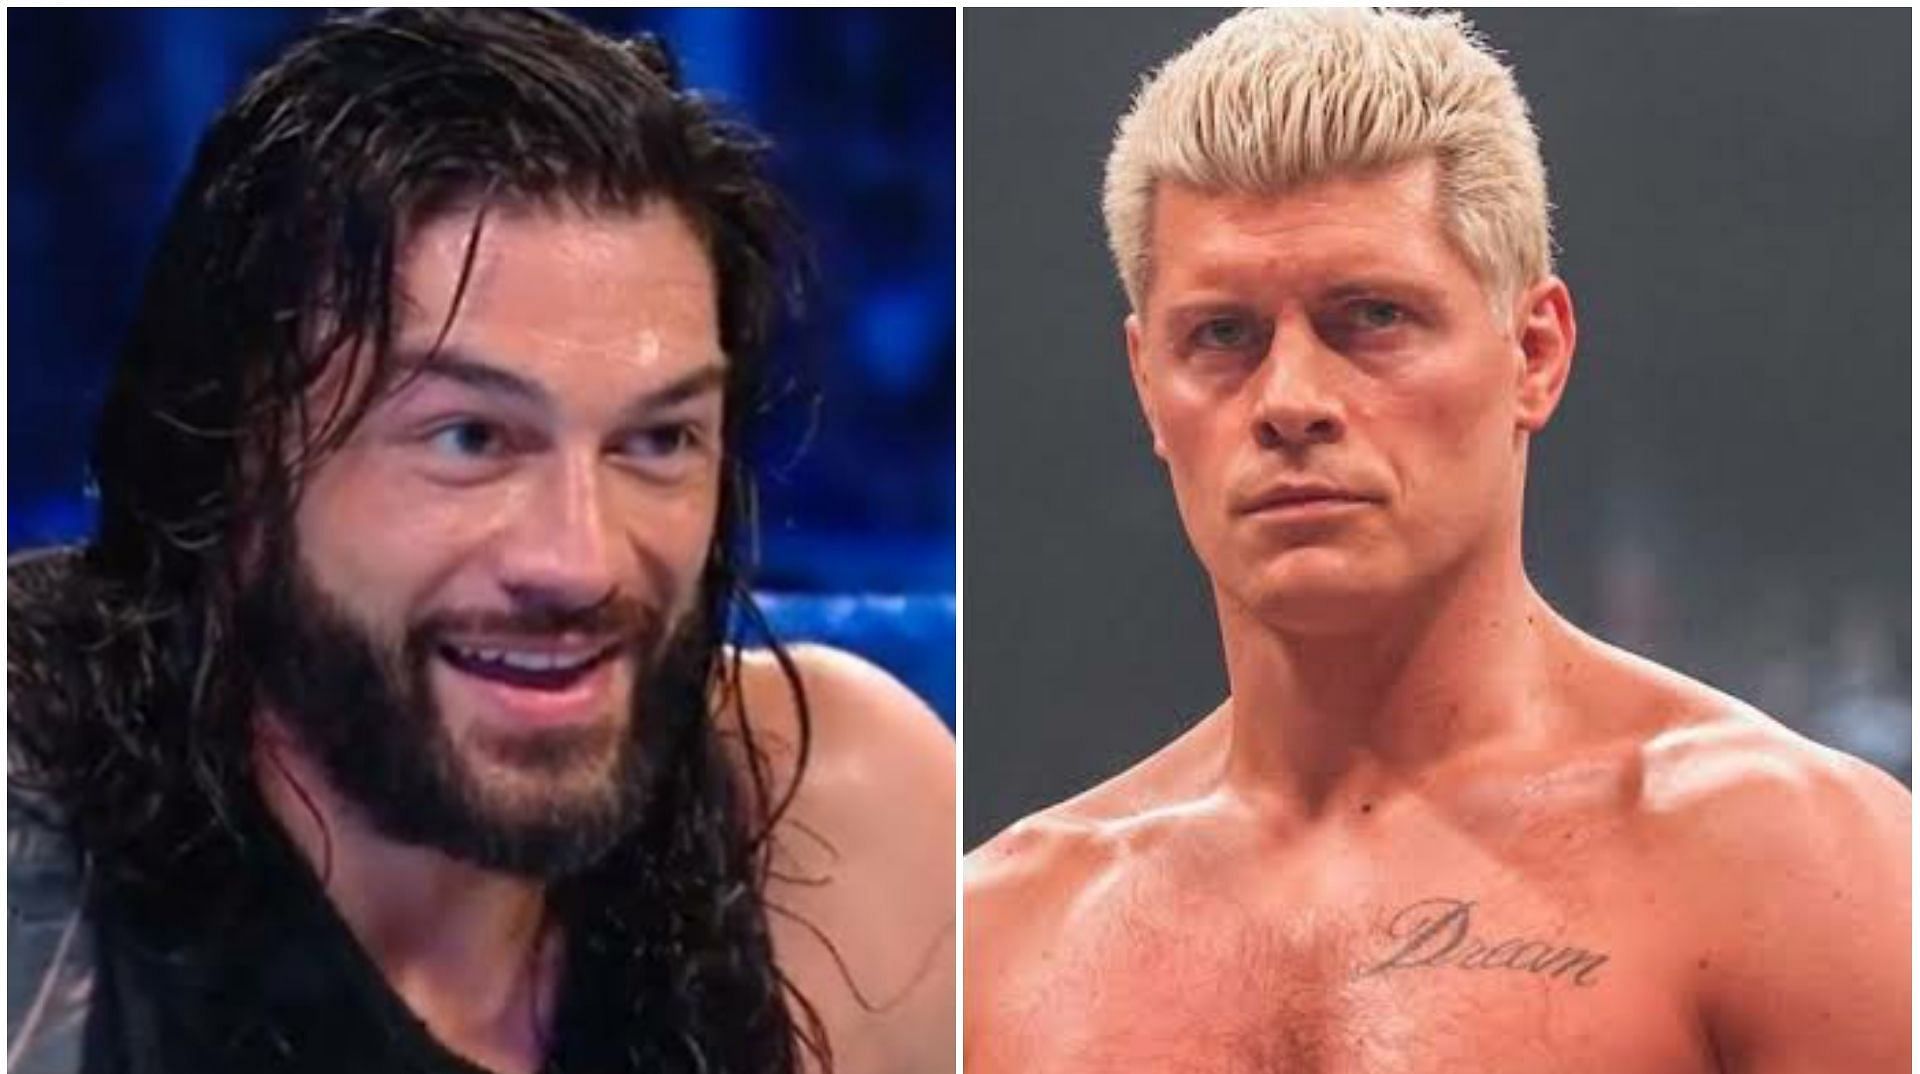 Roman Reigns could defeat Cody Rhodes at WrestleMania 39 after interference from a former WWE champion.